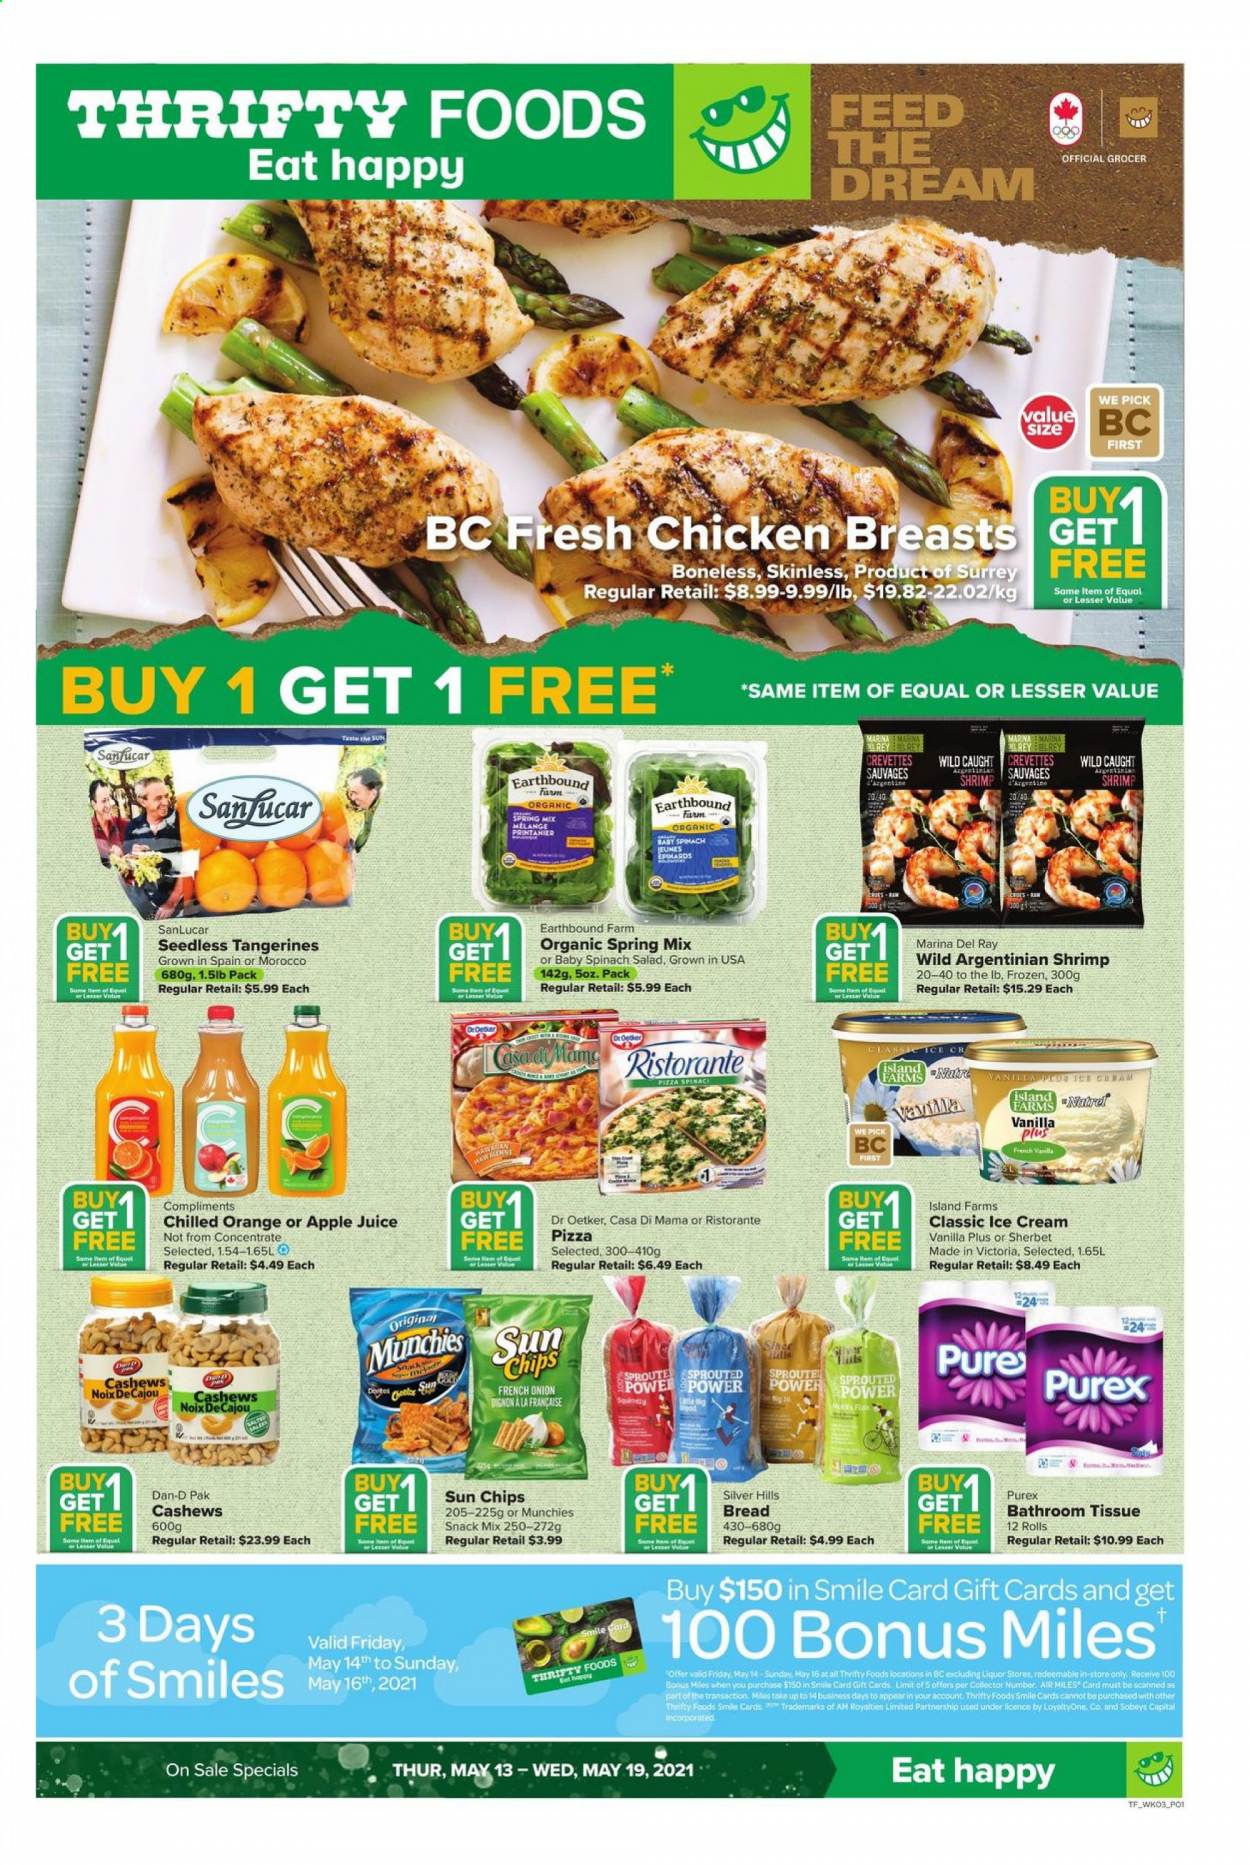 thumbnail - Thrifty Foods Flyer - May 13, 2021 - May 19, 2021 - Sales products - bread, onion, salad, baby spinach, mandarines, tangerines, shrimps, chicken breasts, Dr. Oetker, ice cream, sherbet, salty snack, Dan-D Pak, cashews, apple juice, juice, alcohol, chicken, bath tissue, Purex. Page 1.